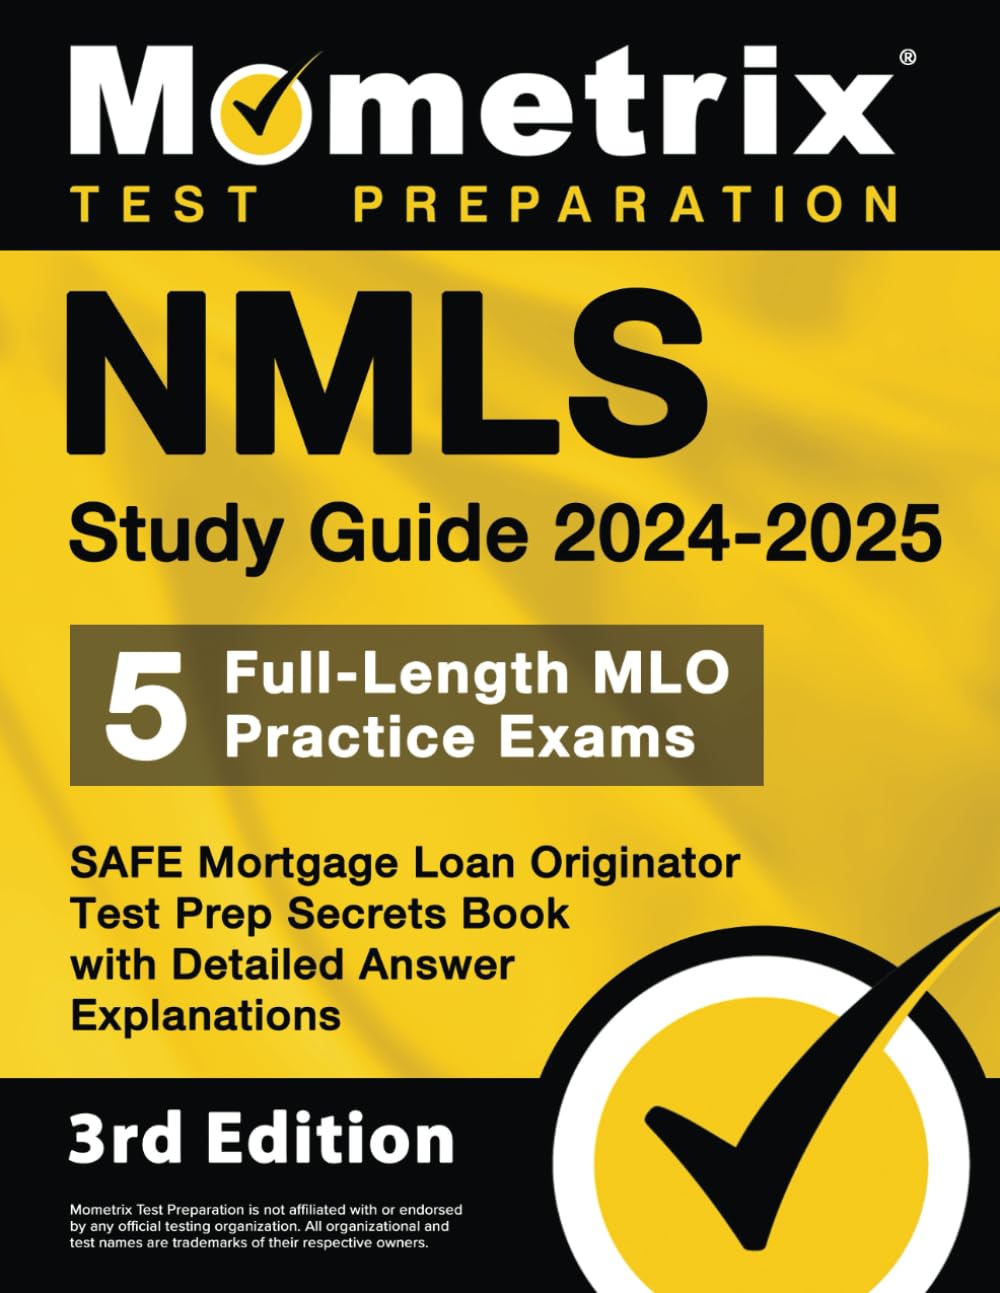 NMLS Study Guide 2024-2025: 5 Full-Length MLO Practice Exams, SAFE Mortgage Loan Originator Test Prep Secrets Book with Detailed Answer Explanations: [3rd Edition]